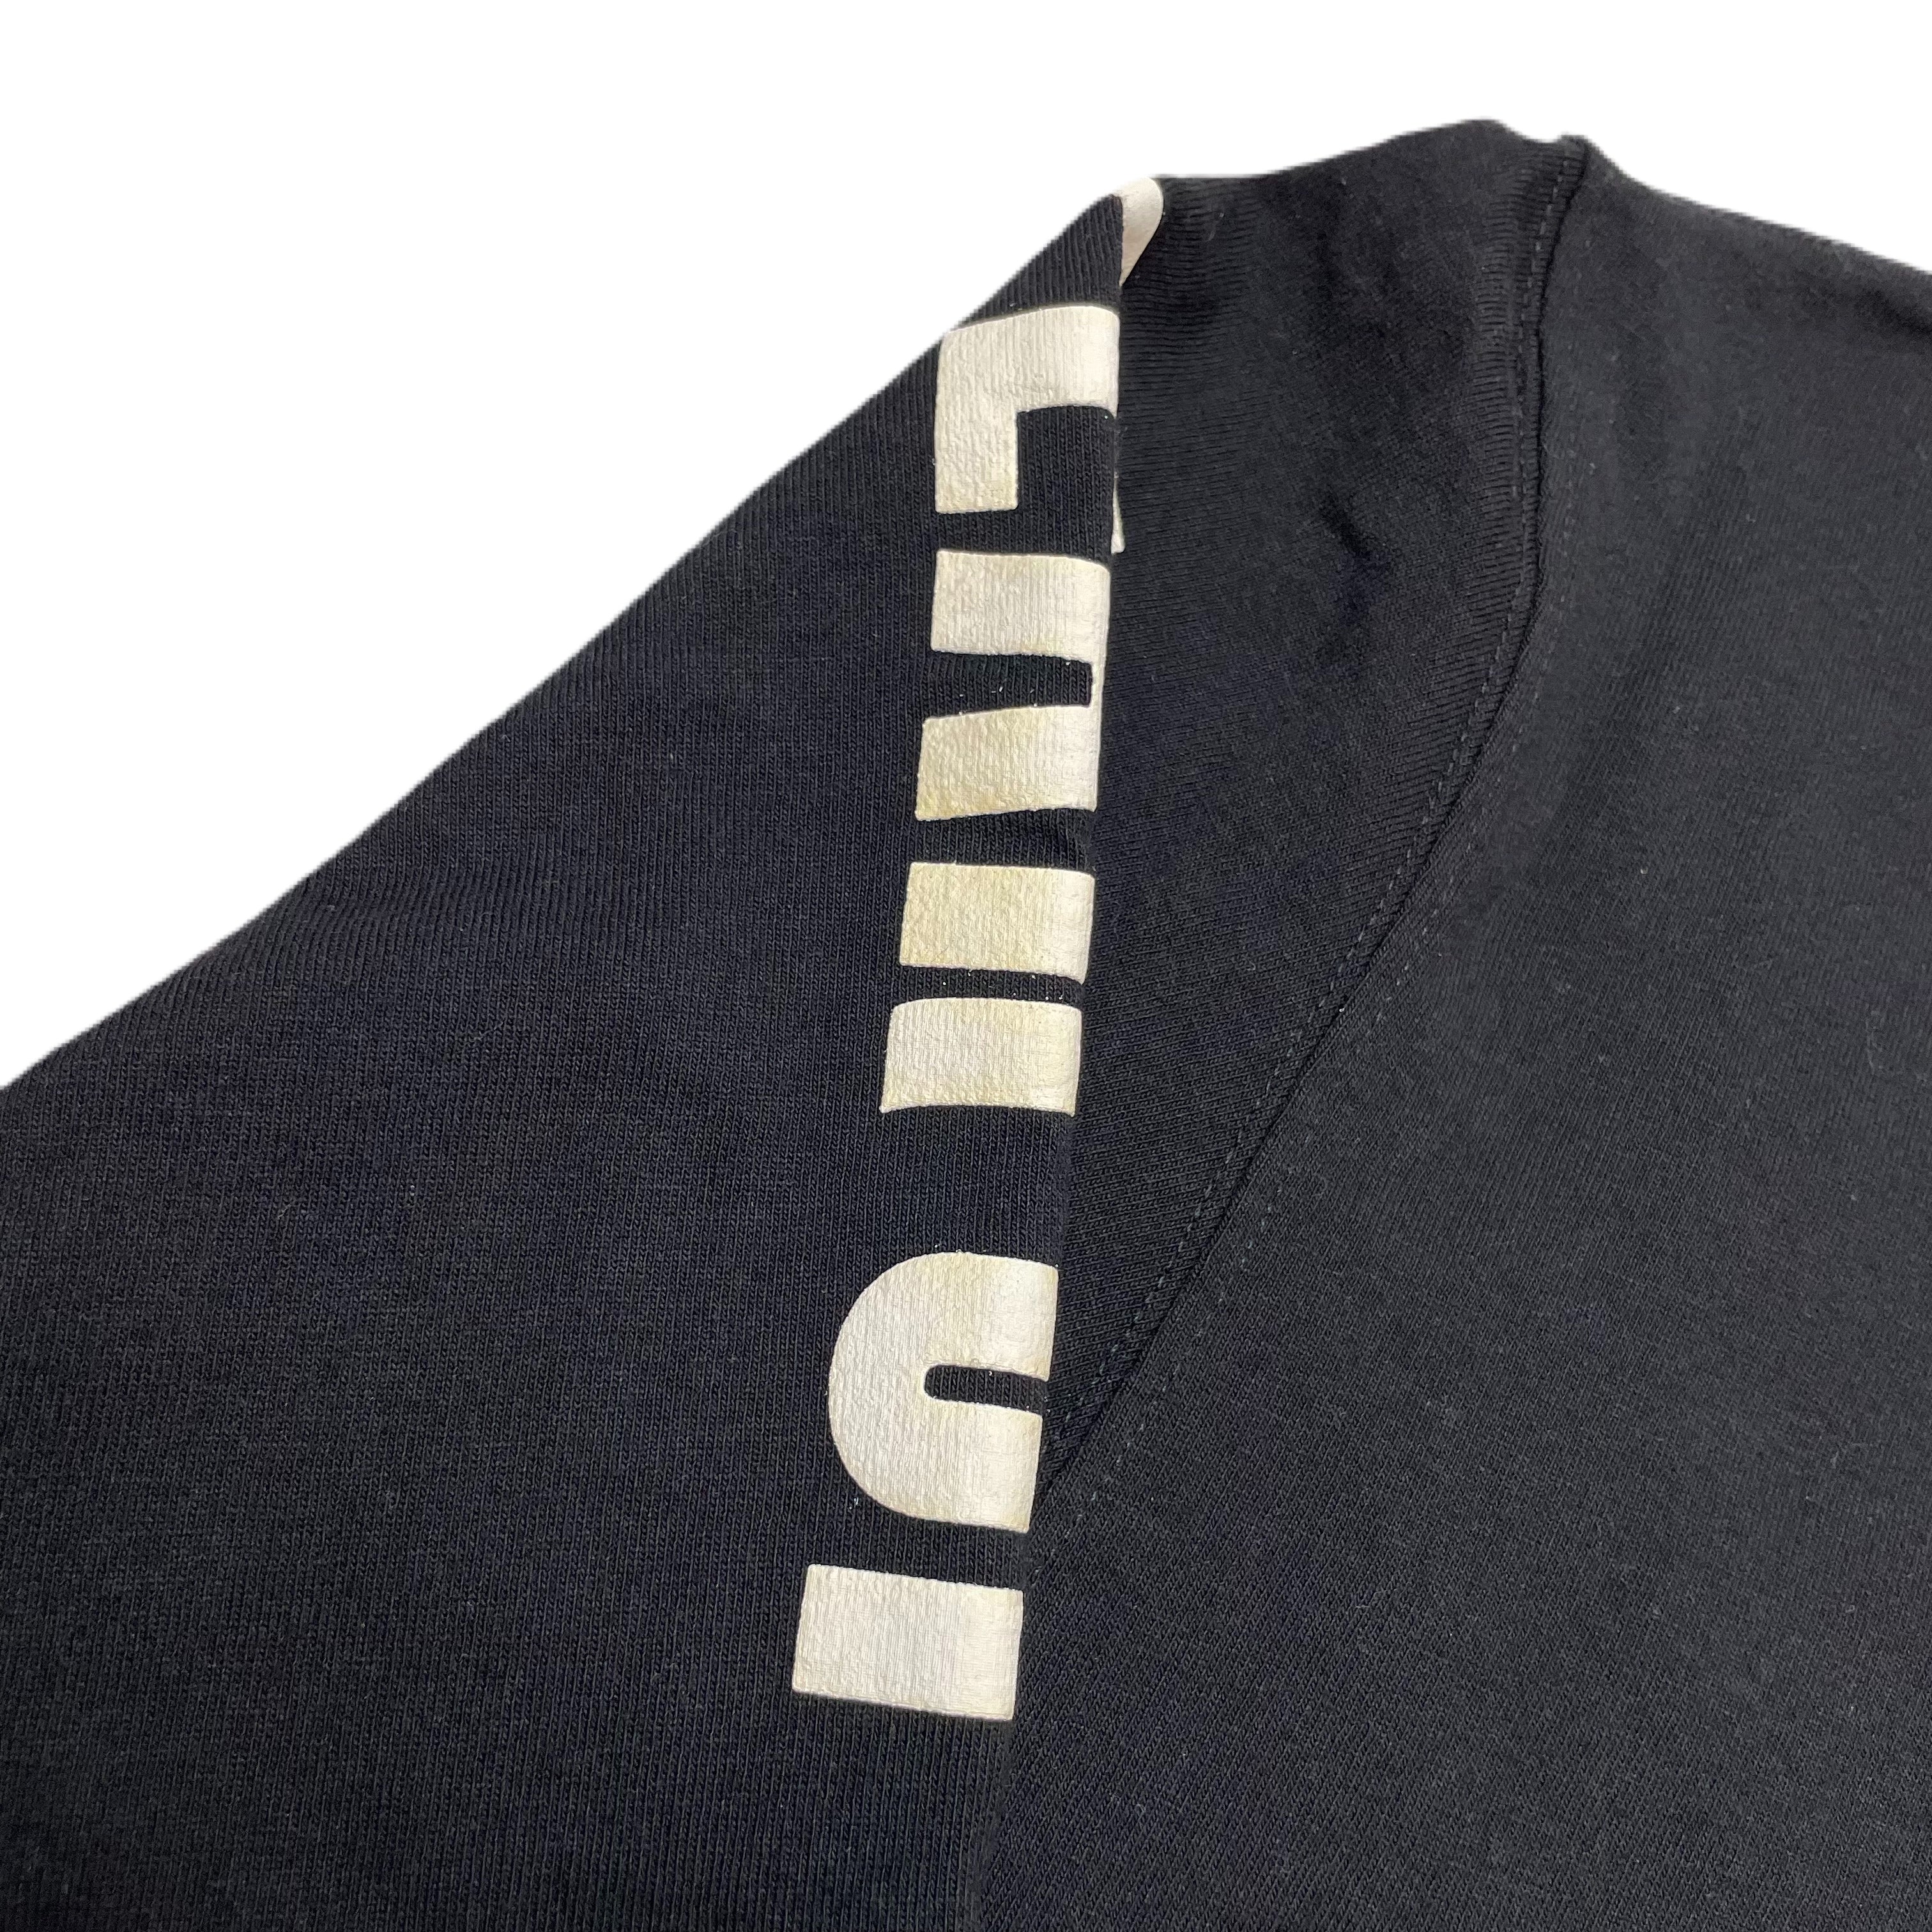 Fear of God Jeans Fifth Collection Black Knit Hoodie - Black Knit Hoodie